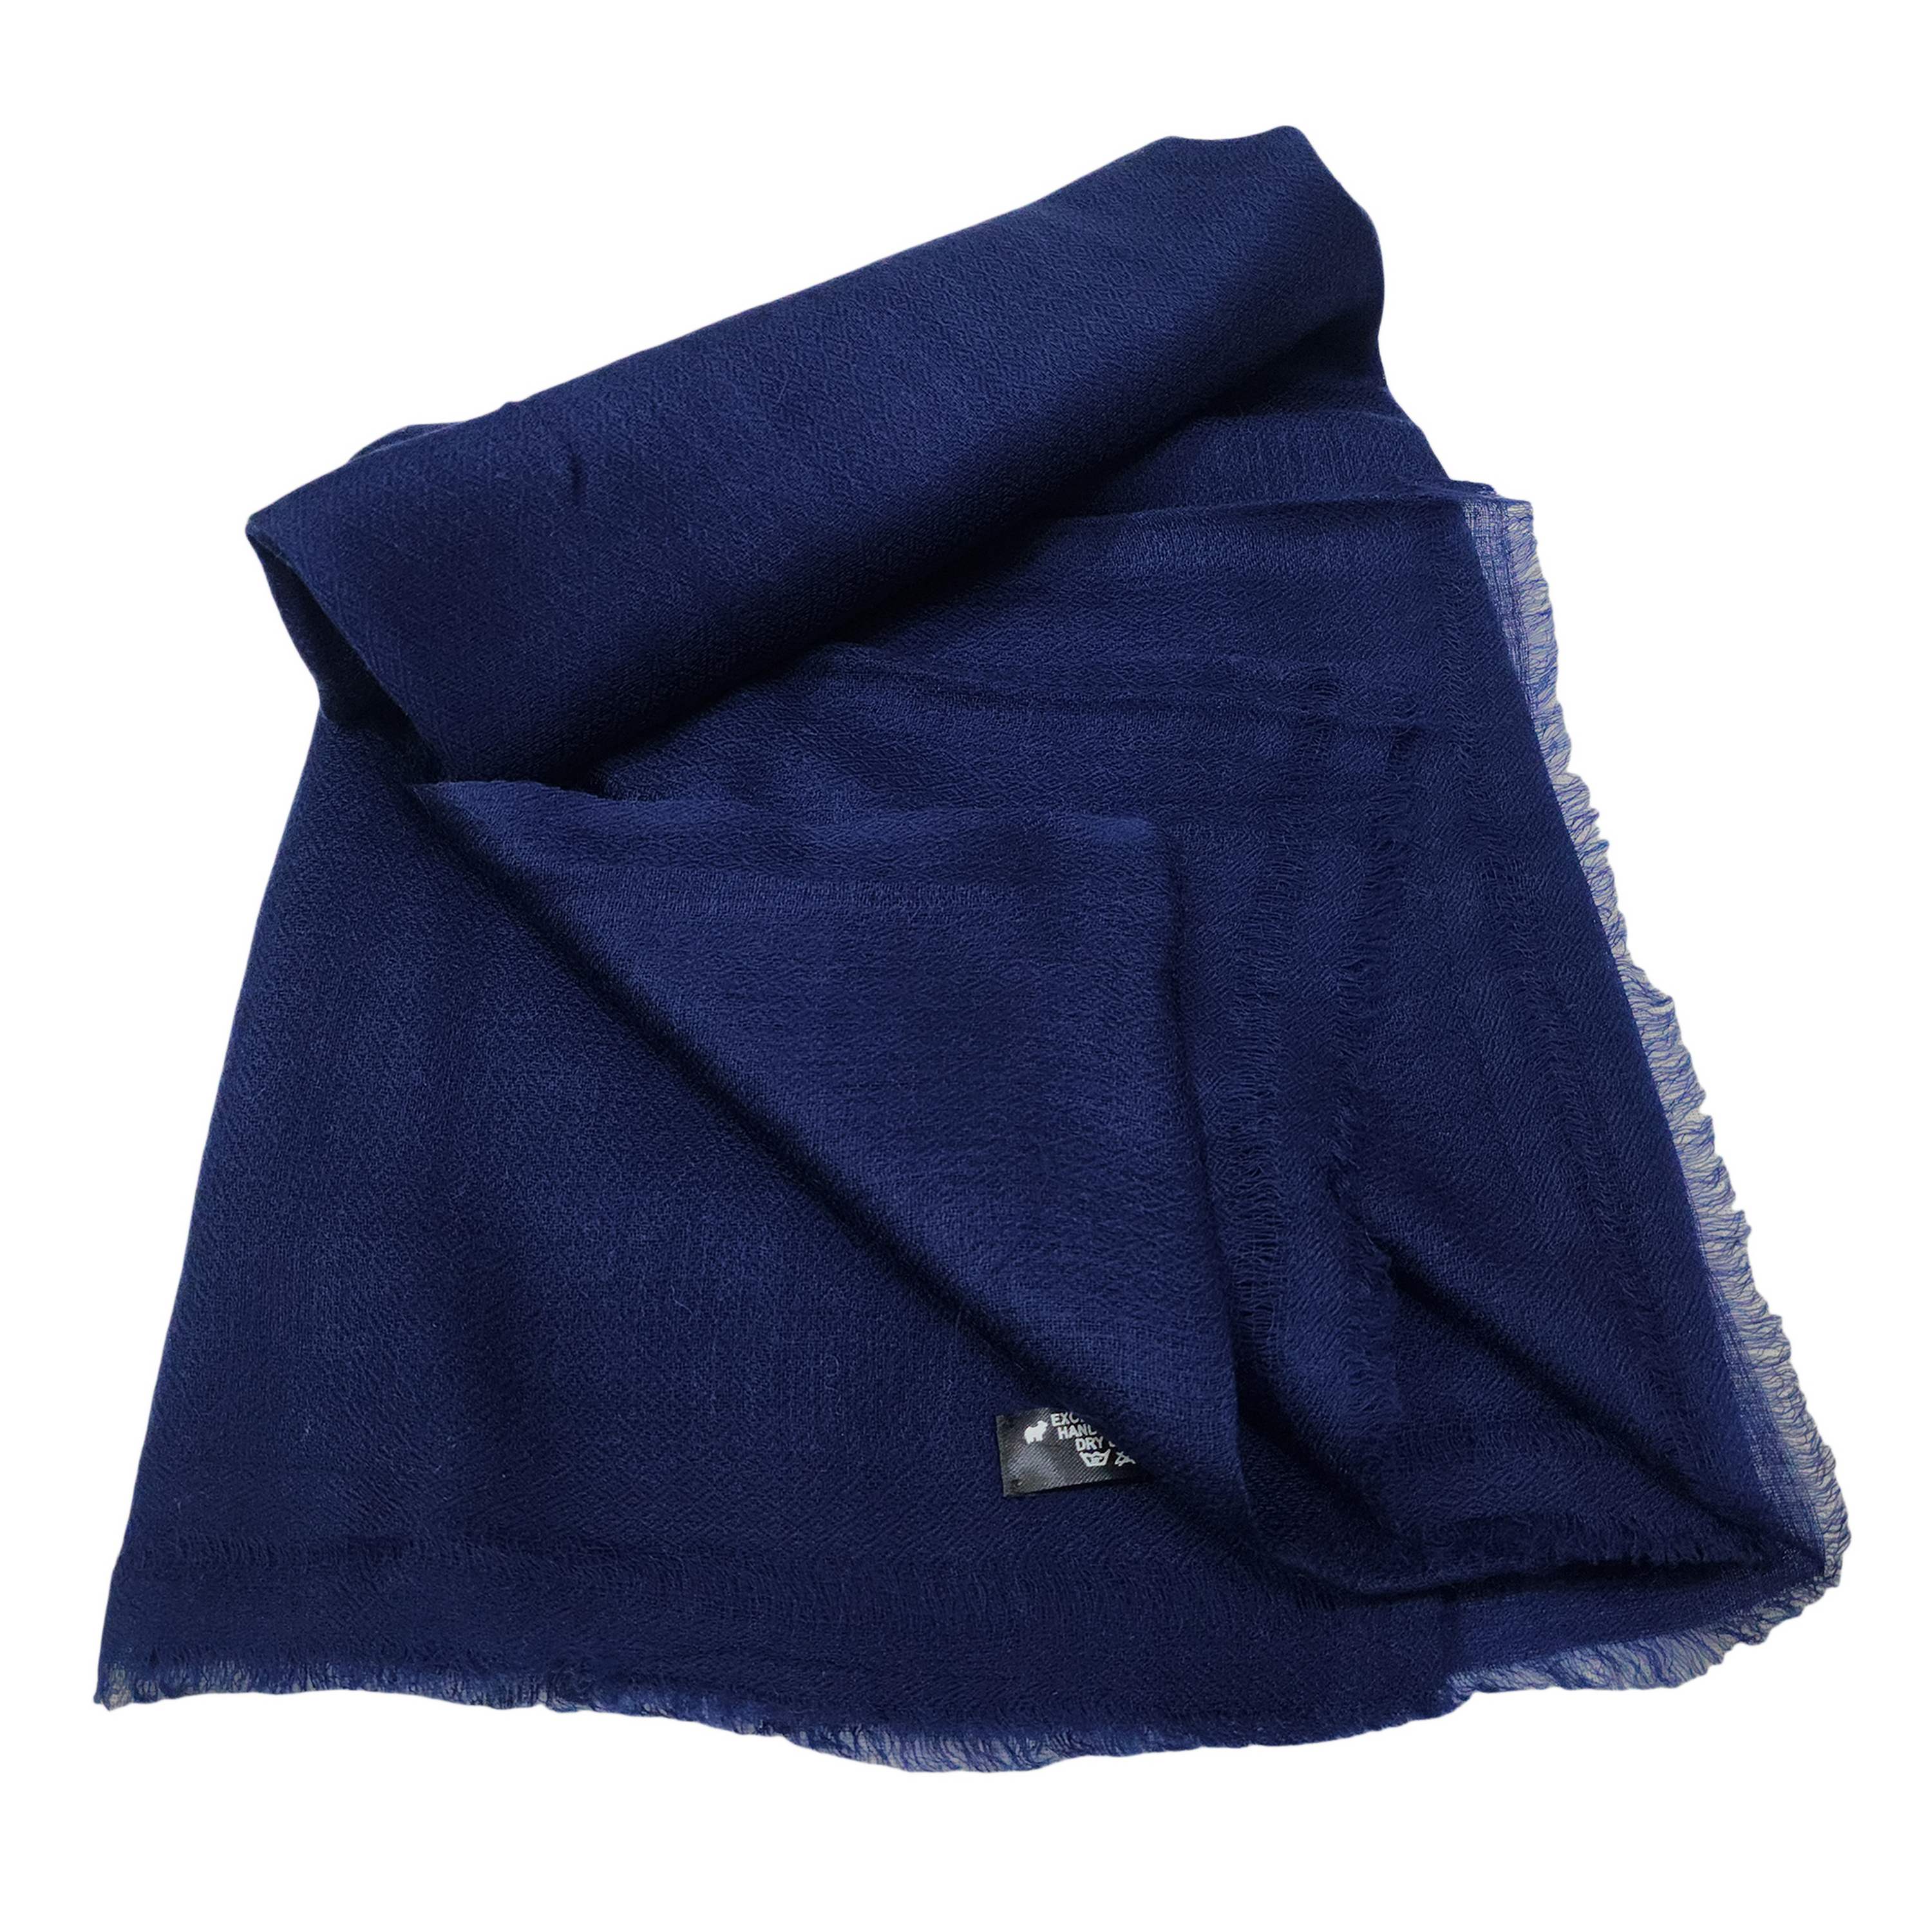 Ring Shawl, A Thin, Soft, And Light Shawl For All-weather Use, Two-ply Wool, Color blue